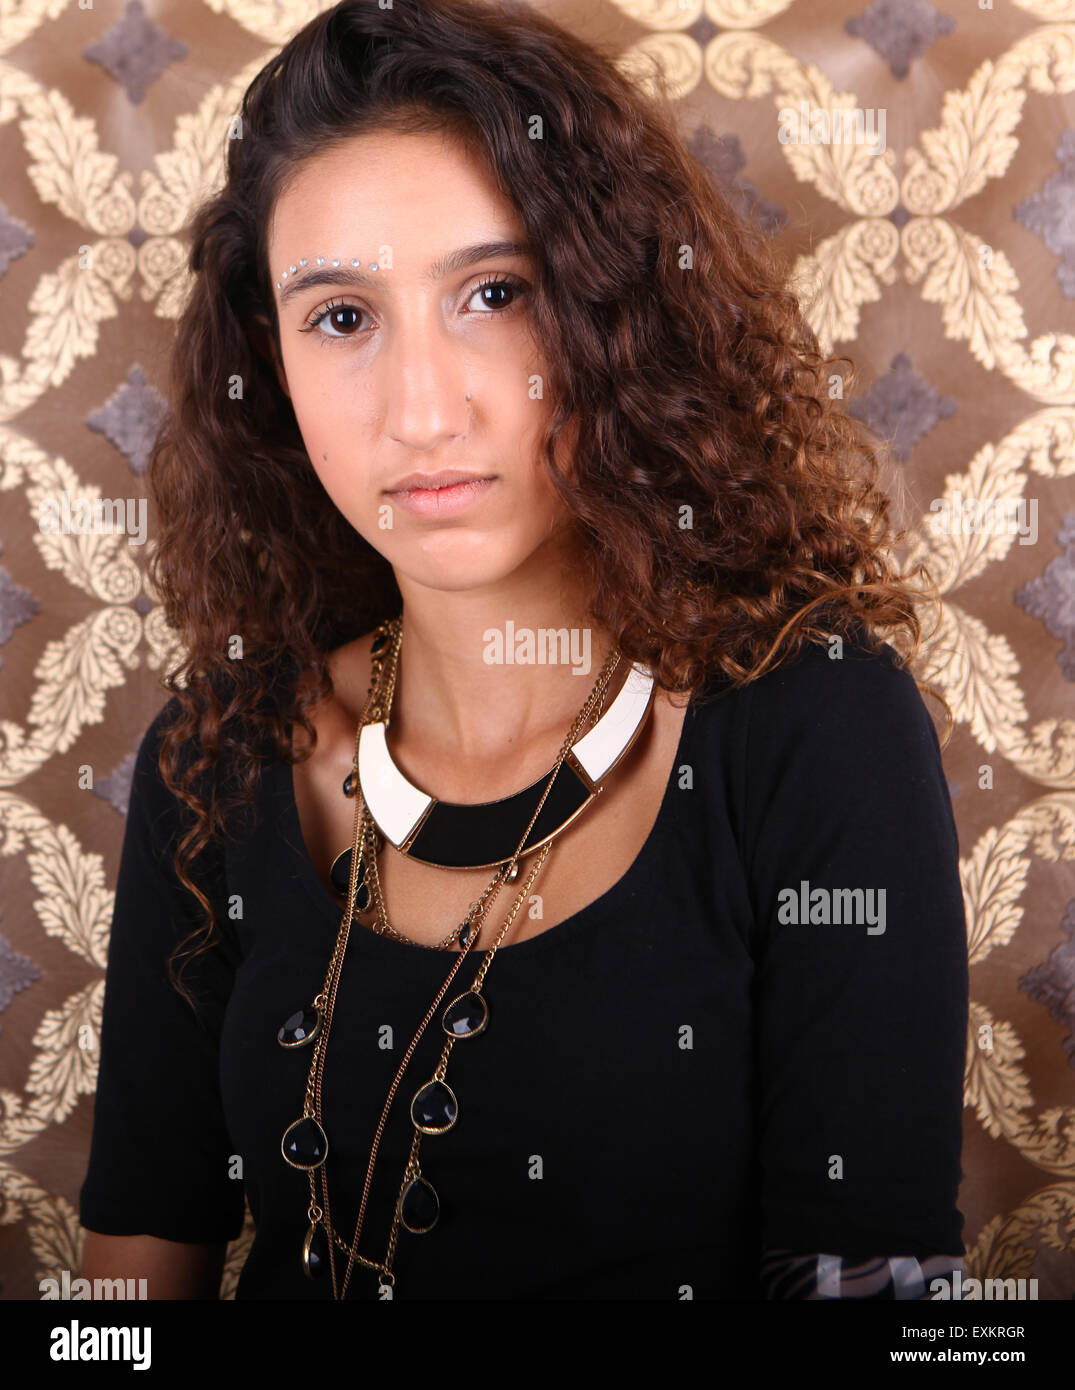 portrait of a young fashionable female teen in black top Stock Photo